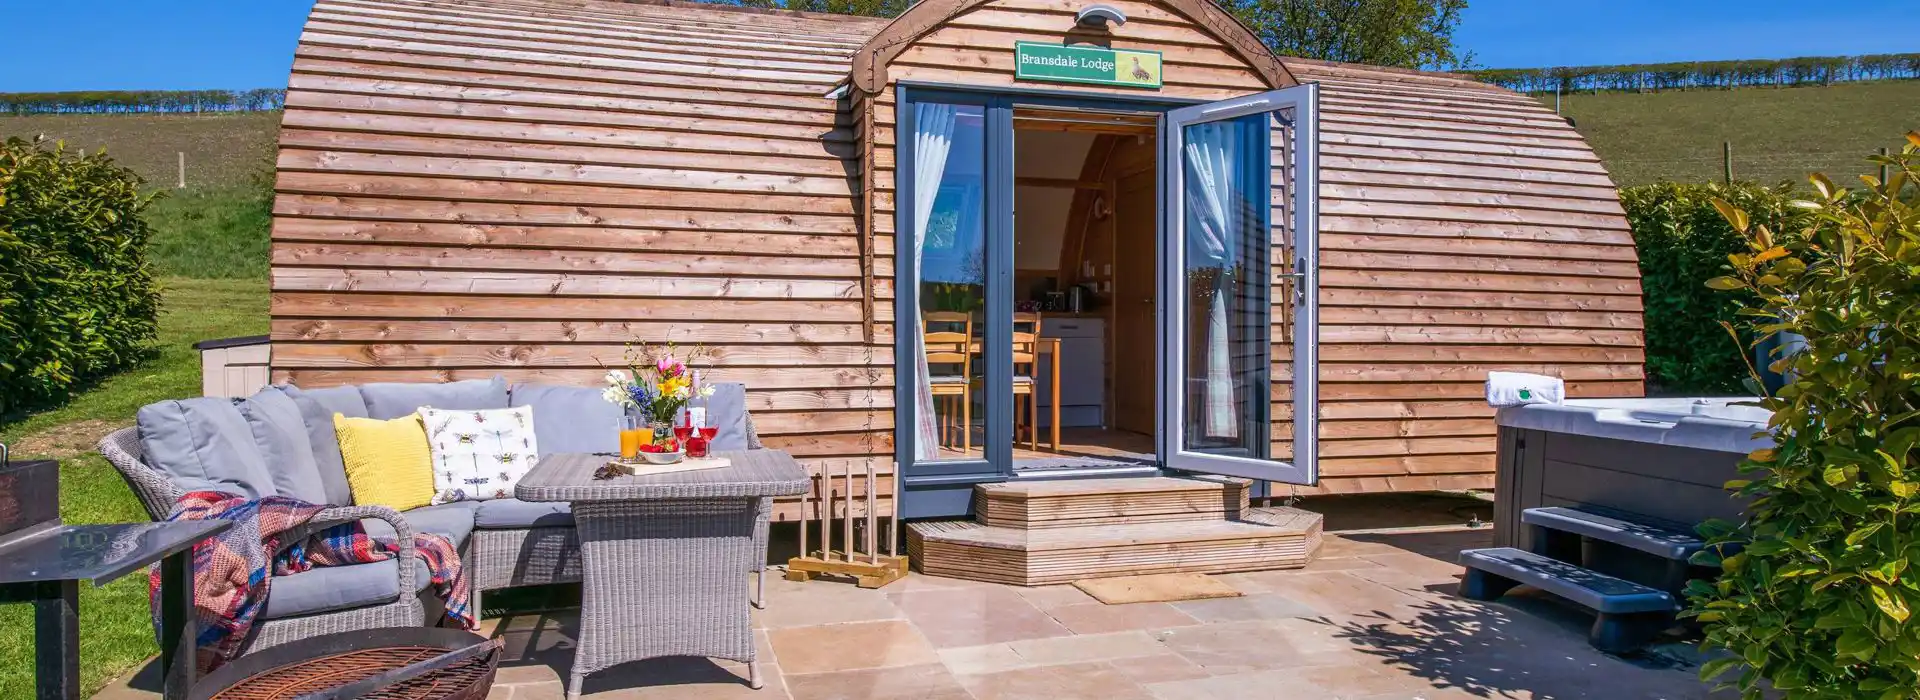 Camping and glamping pods with hot tubs in Scarborough